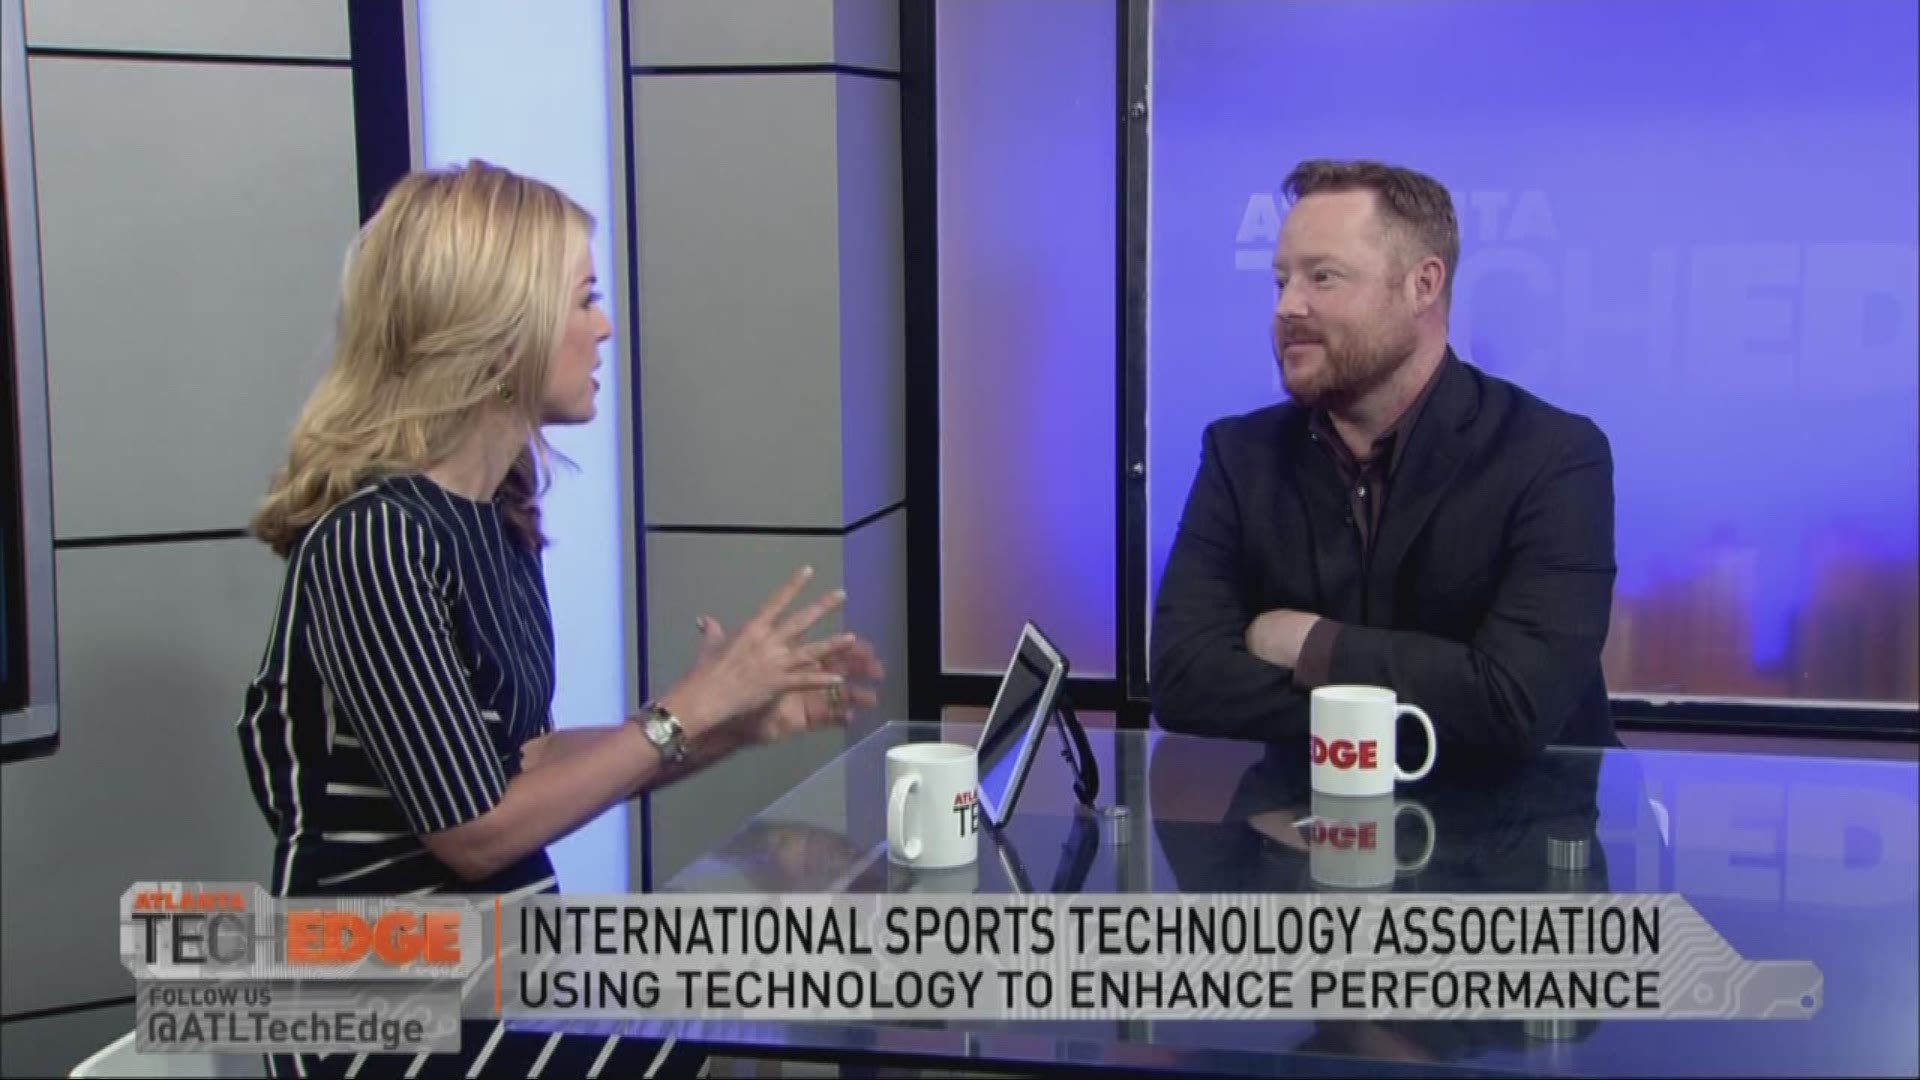 David Geddes, Founder & CEO of The International Sports Technology Association, joined Cara to discuss the relationship between sports & technology. 